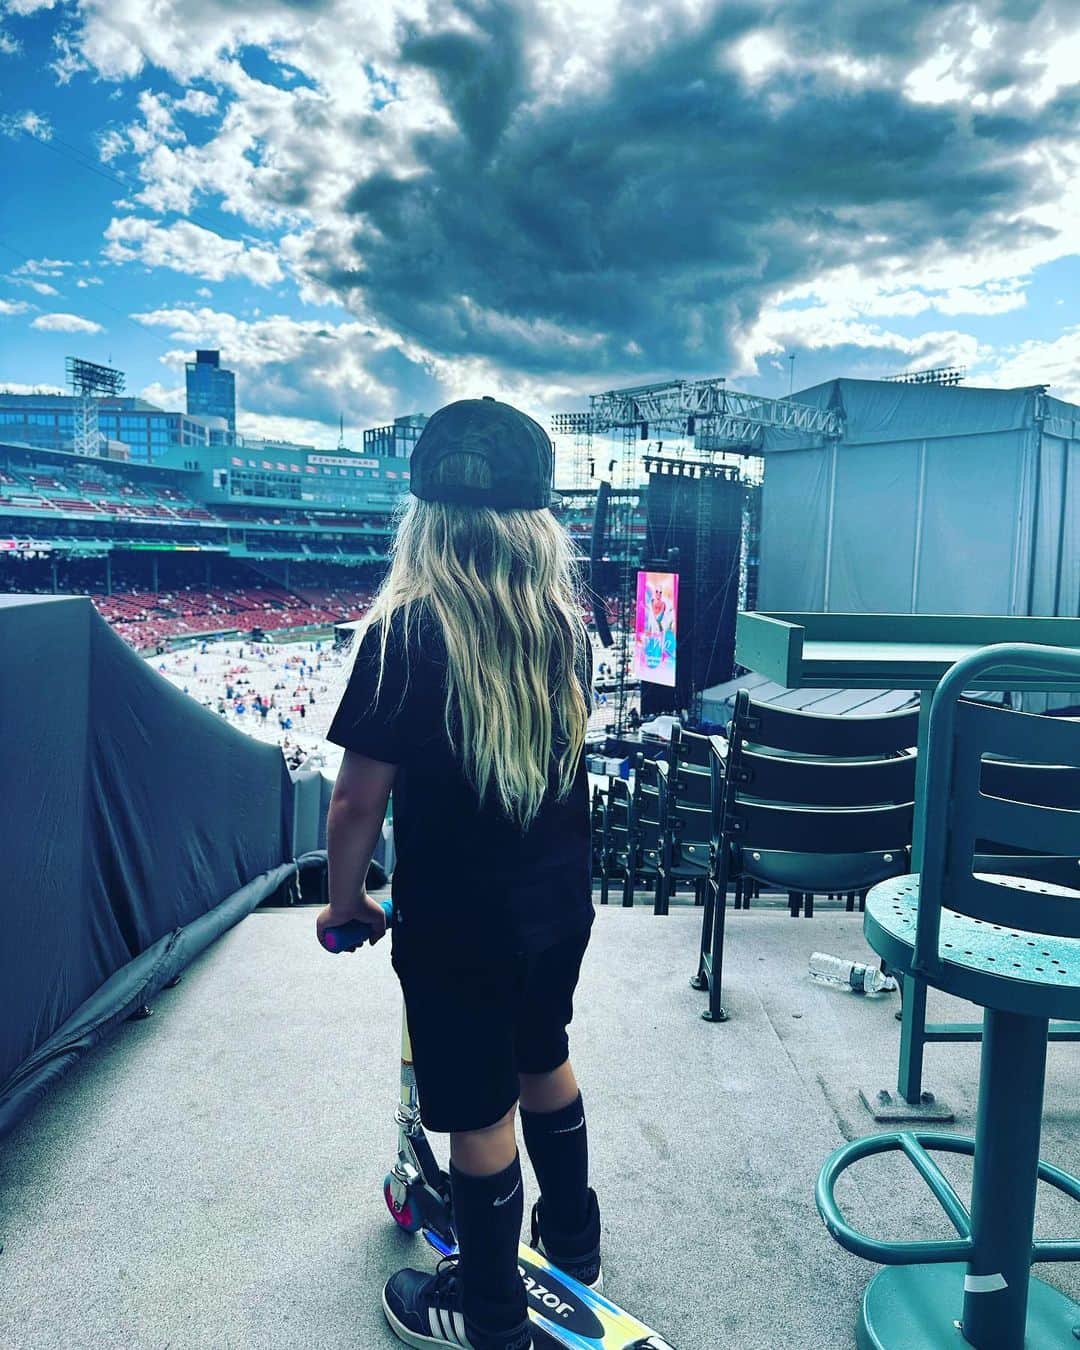 P!nk（ピンク）のインスタグラム：「HUMBLE BRAG SLASH APPRECIATION POST… @fenwaypark to be here with my baby boy, and all of my touring family crew, to have the honor to play not one but two nights at Fenway Park in this beautiful city….. and to find out we broke attendance records both nights (most in history?!?!) and to look out into the crowd of beautiful humans from 8-80 years old. I keep trying to figure out how this is all happening? I am so beyond grateful that we get to have this experience- and that we get to come together and laugh and cry and feel every feeling together. It is a full body experience and I am blown away. I am never not grateful ❤️let’s spread some joy 🤩」